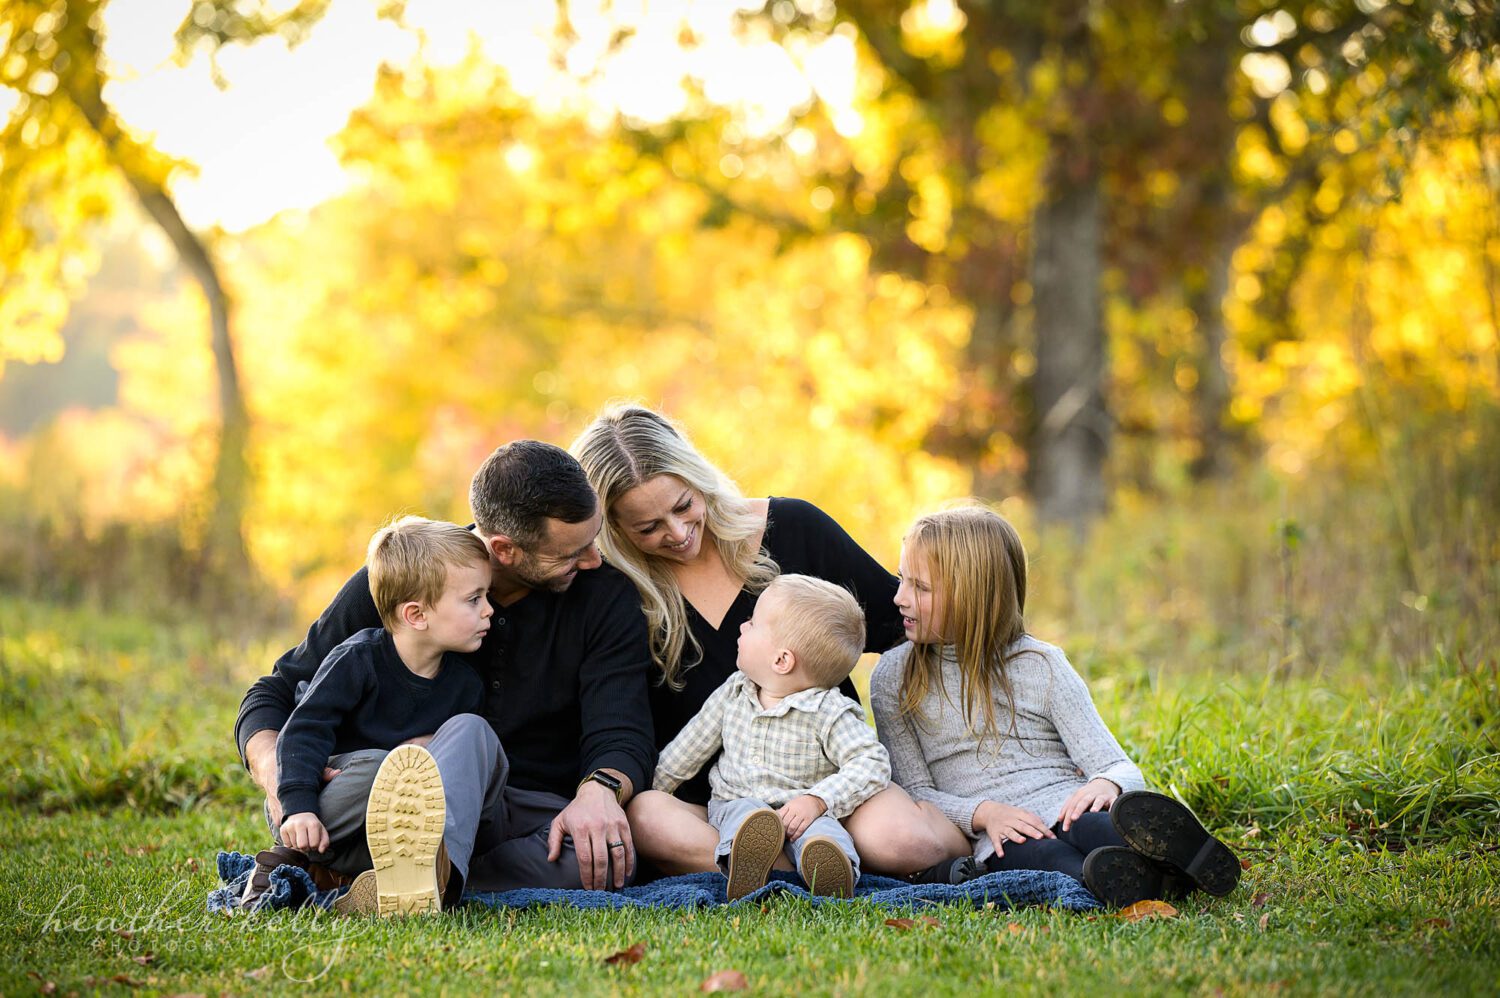 a family mini session in newtown ct. A family of 5 all looks at each other while siting on a blanket. 